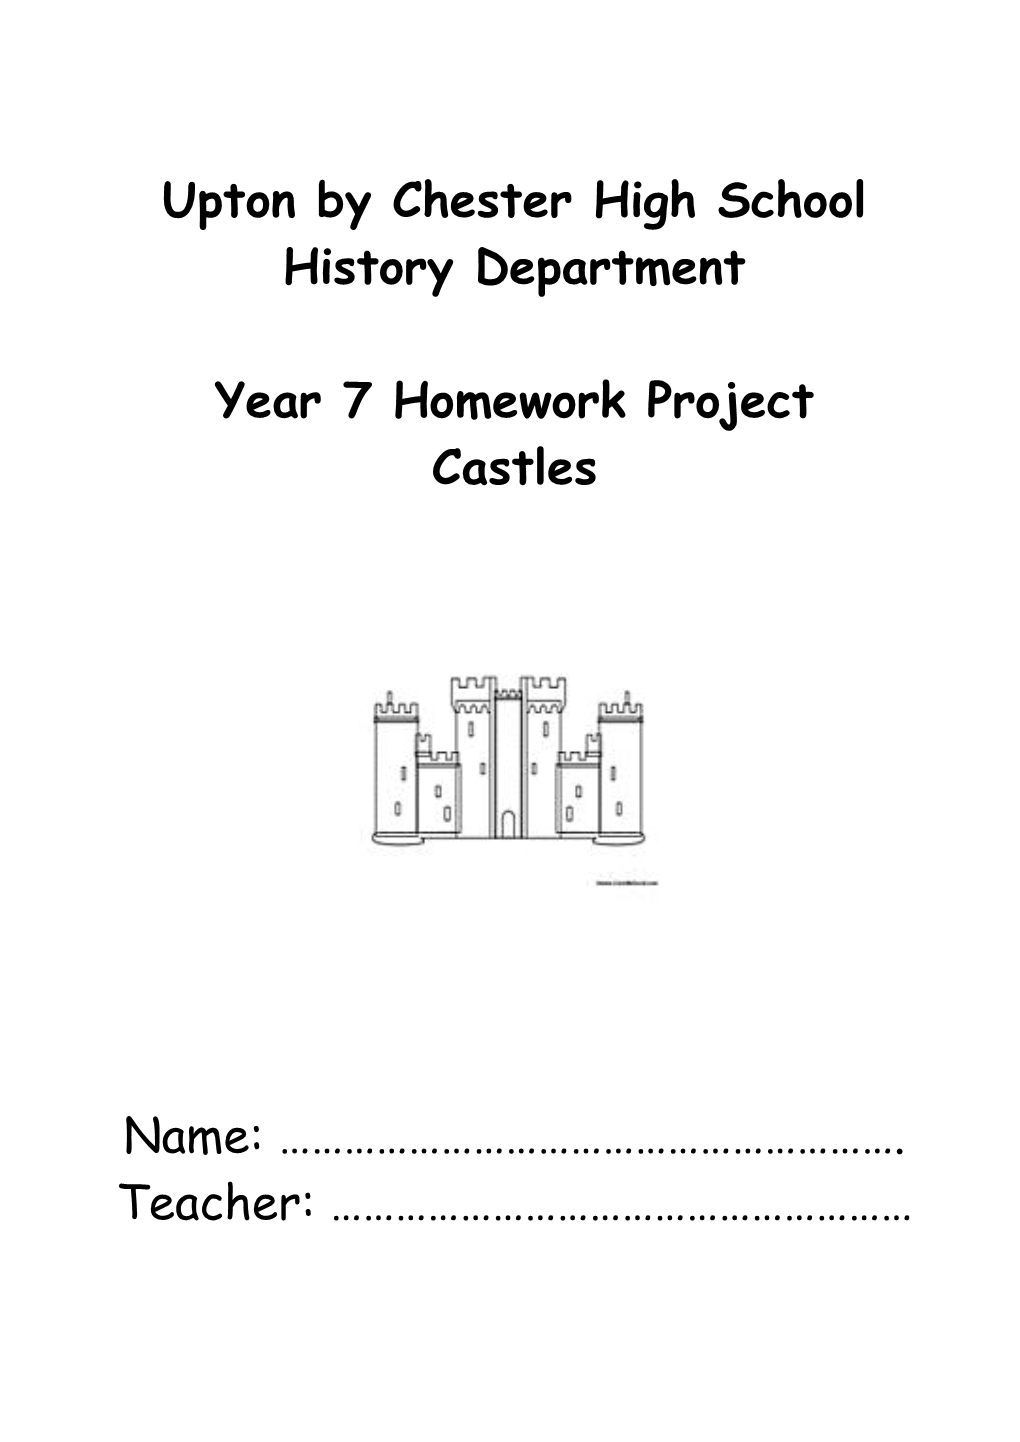 Year 7 History Homework Project